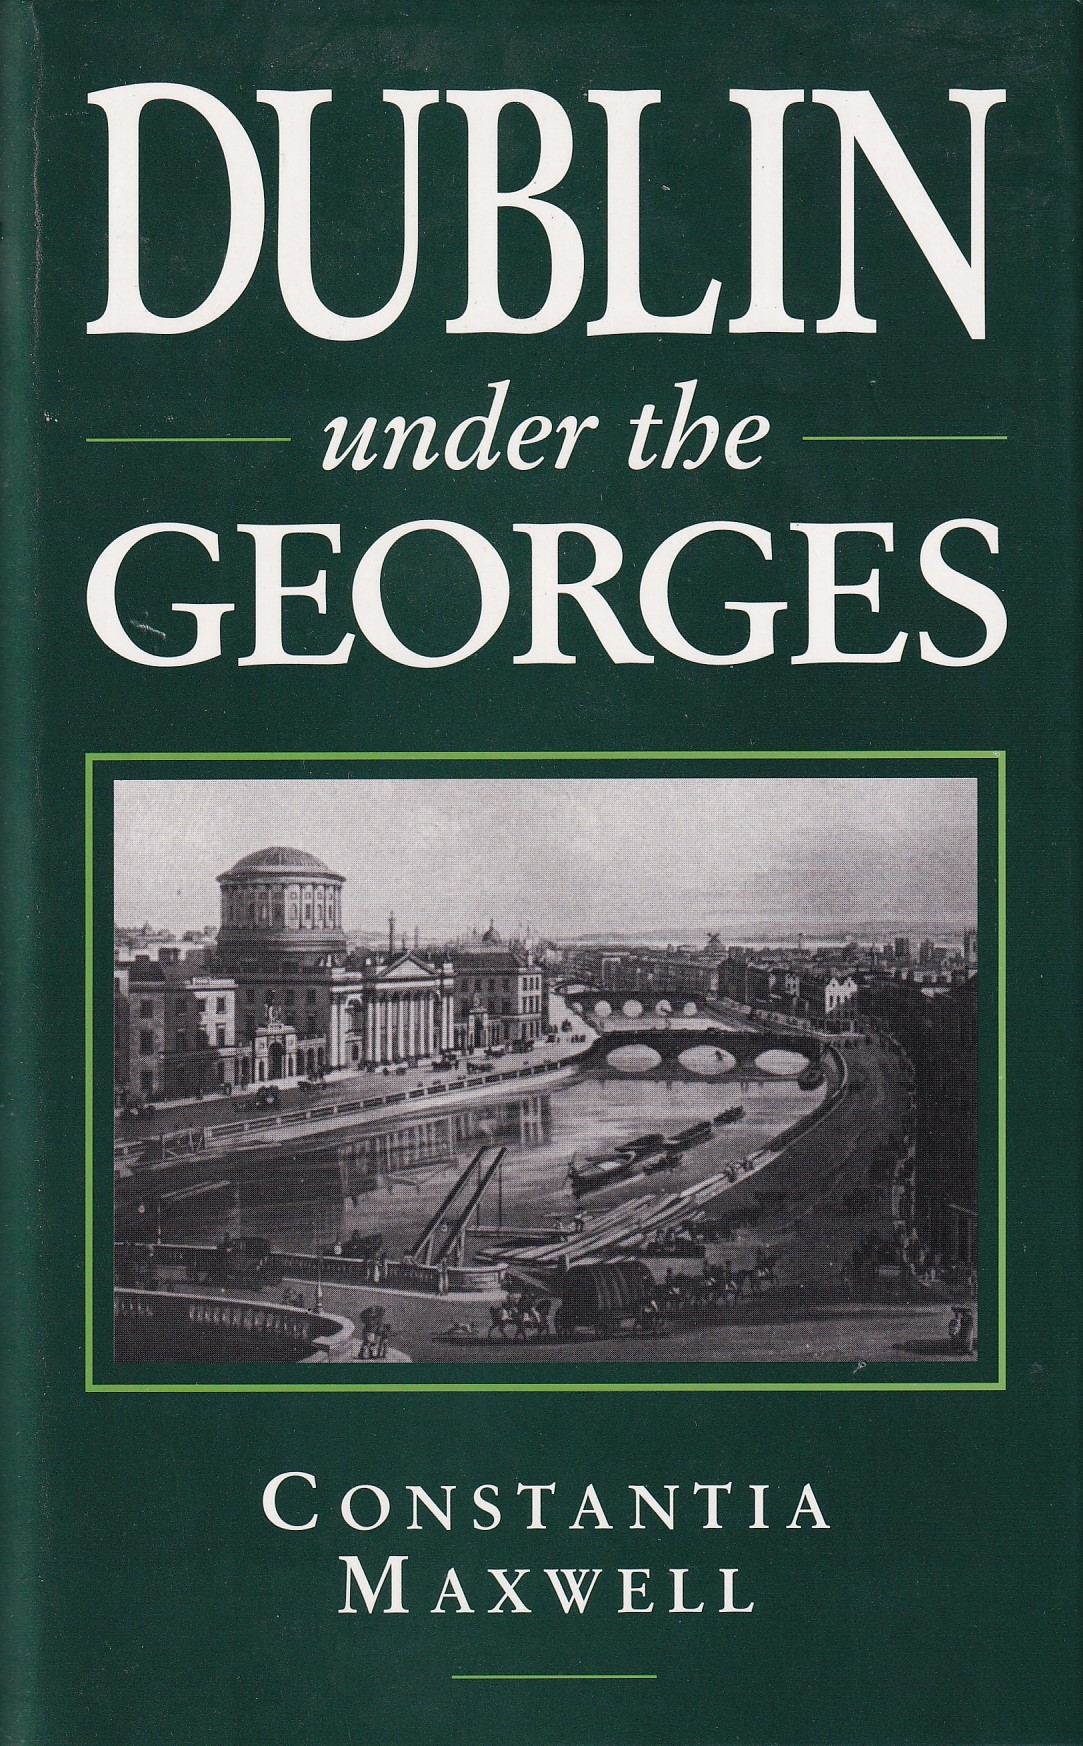 Dublin Under the Georges by Constantia Maxwell